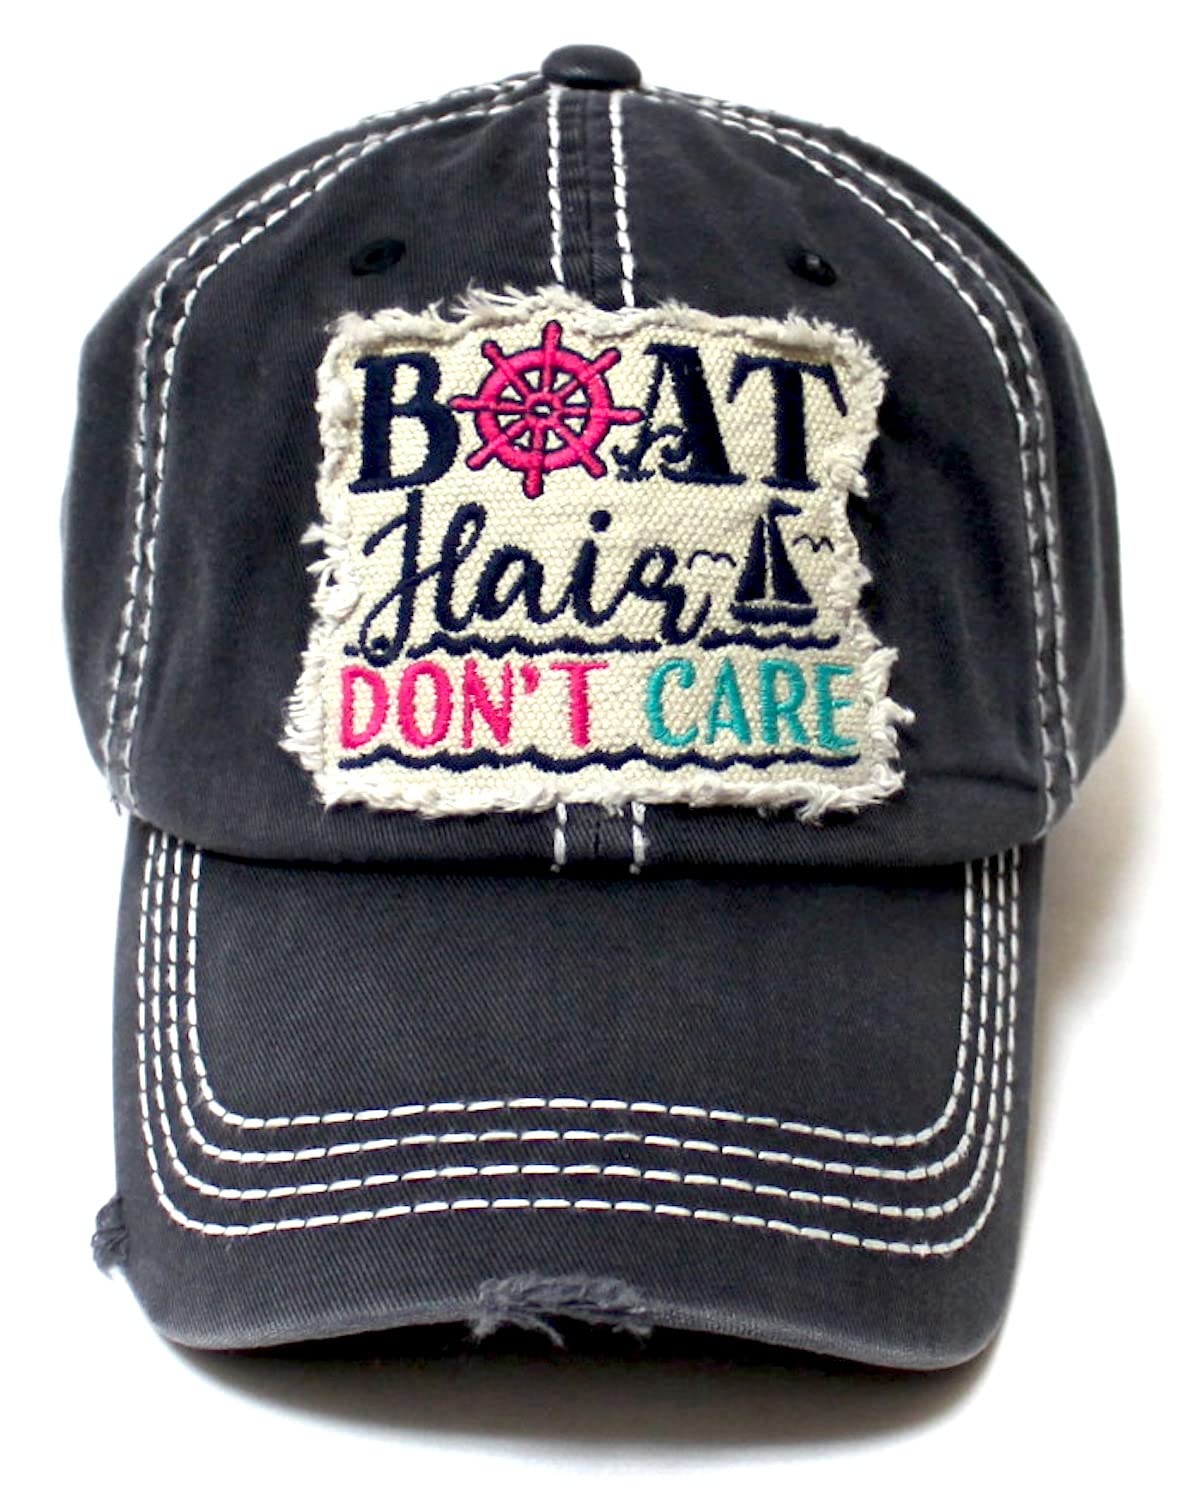 CAPS 'N VINTAGE Camping Ballcap Boat Hair Don't Care Patch Embroidery Outdoors Adjustable Hat, Black